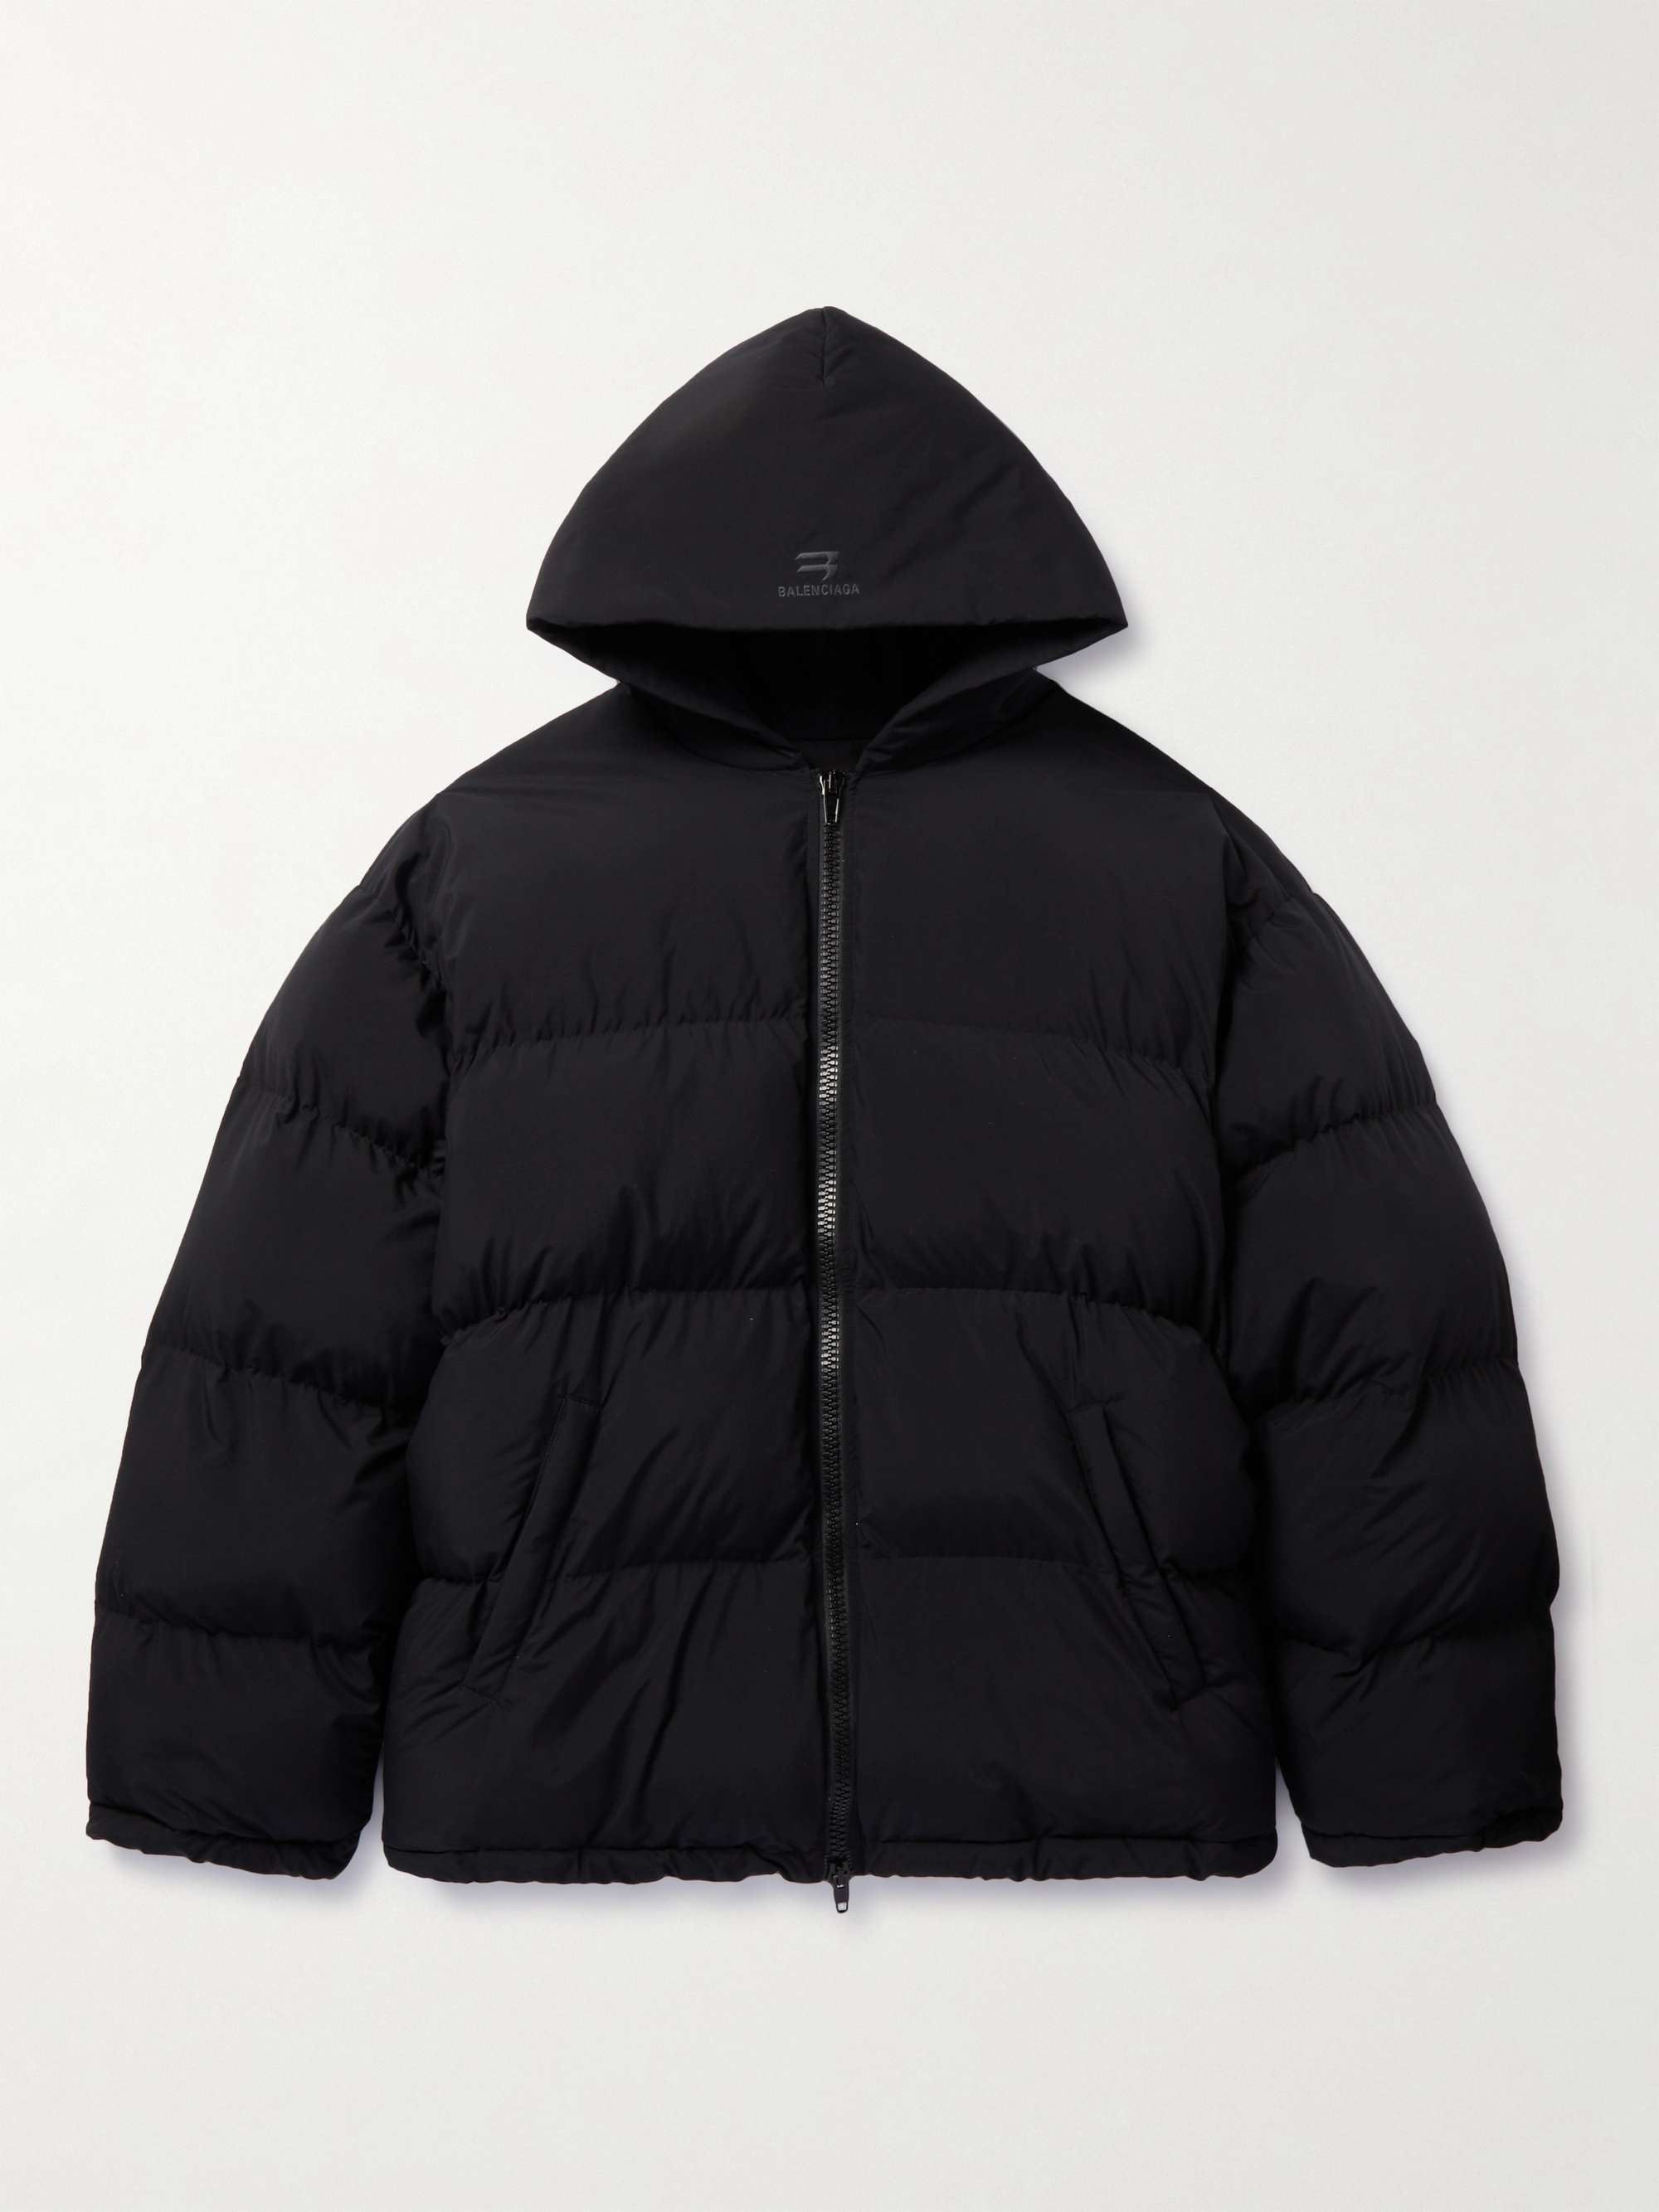 BALENCIAGA Logo-Embroidered Quilted Shell Hooded Jacket for Men | MR PORTER